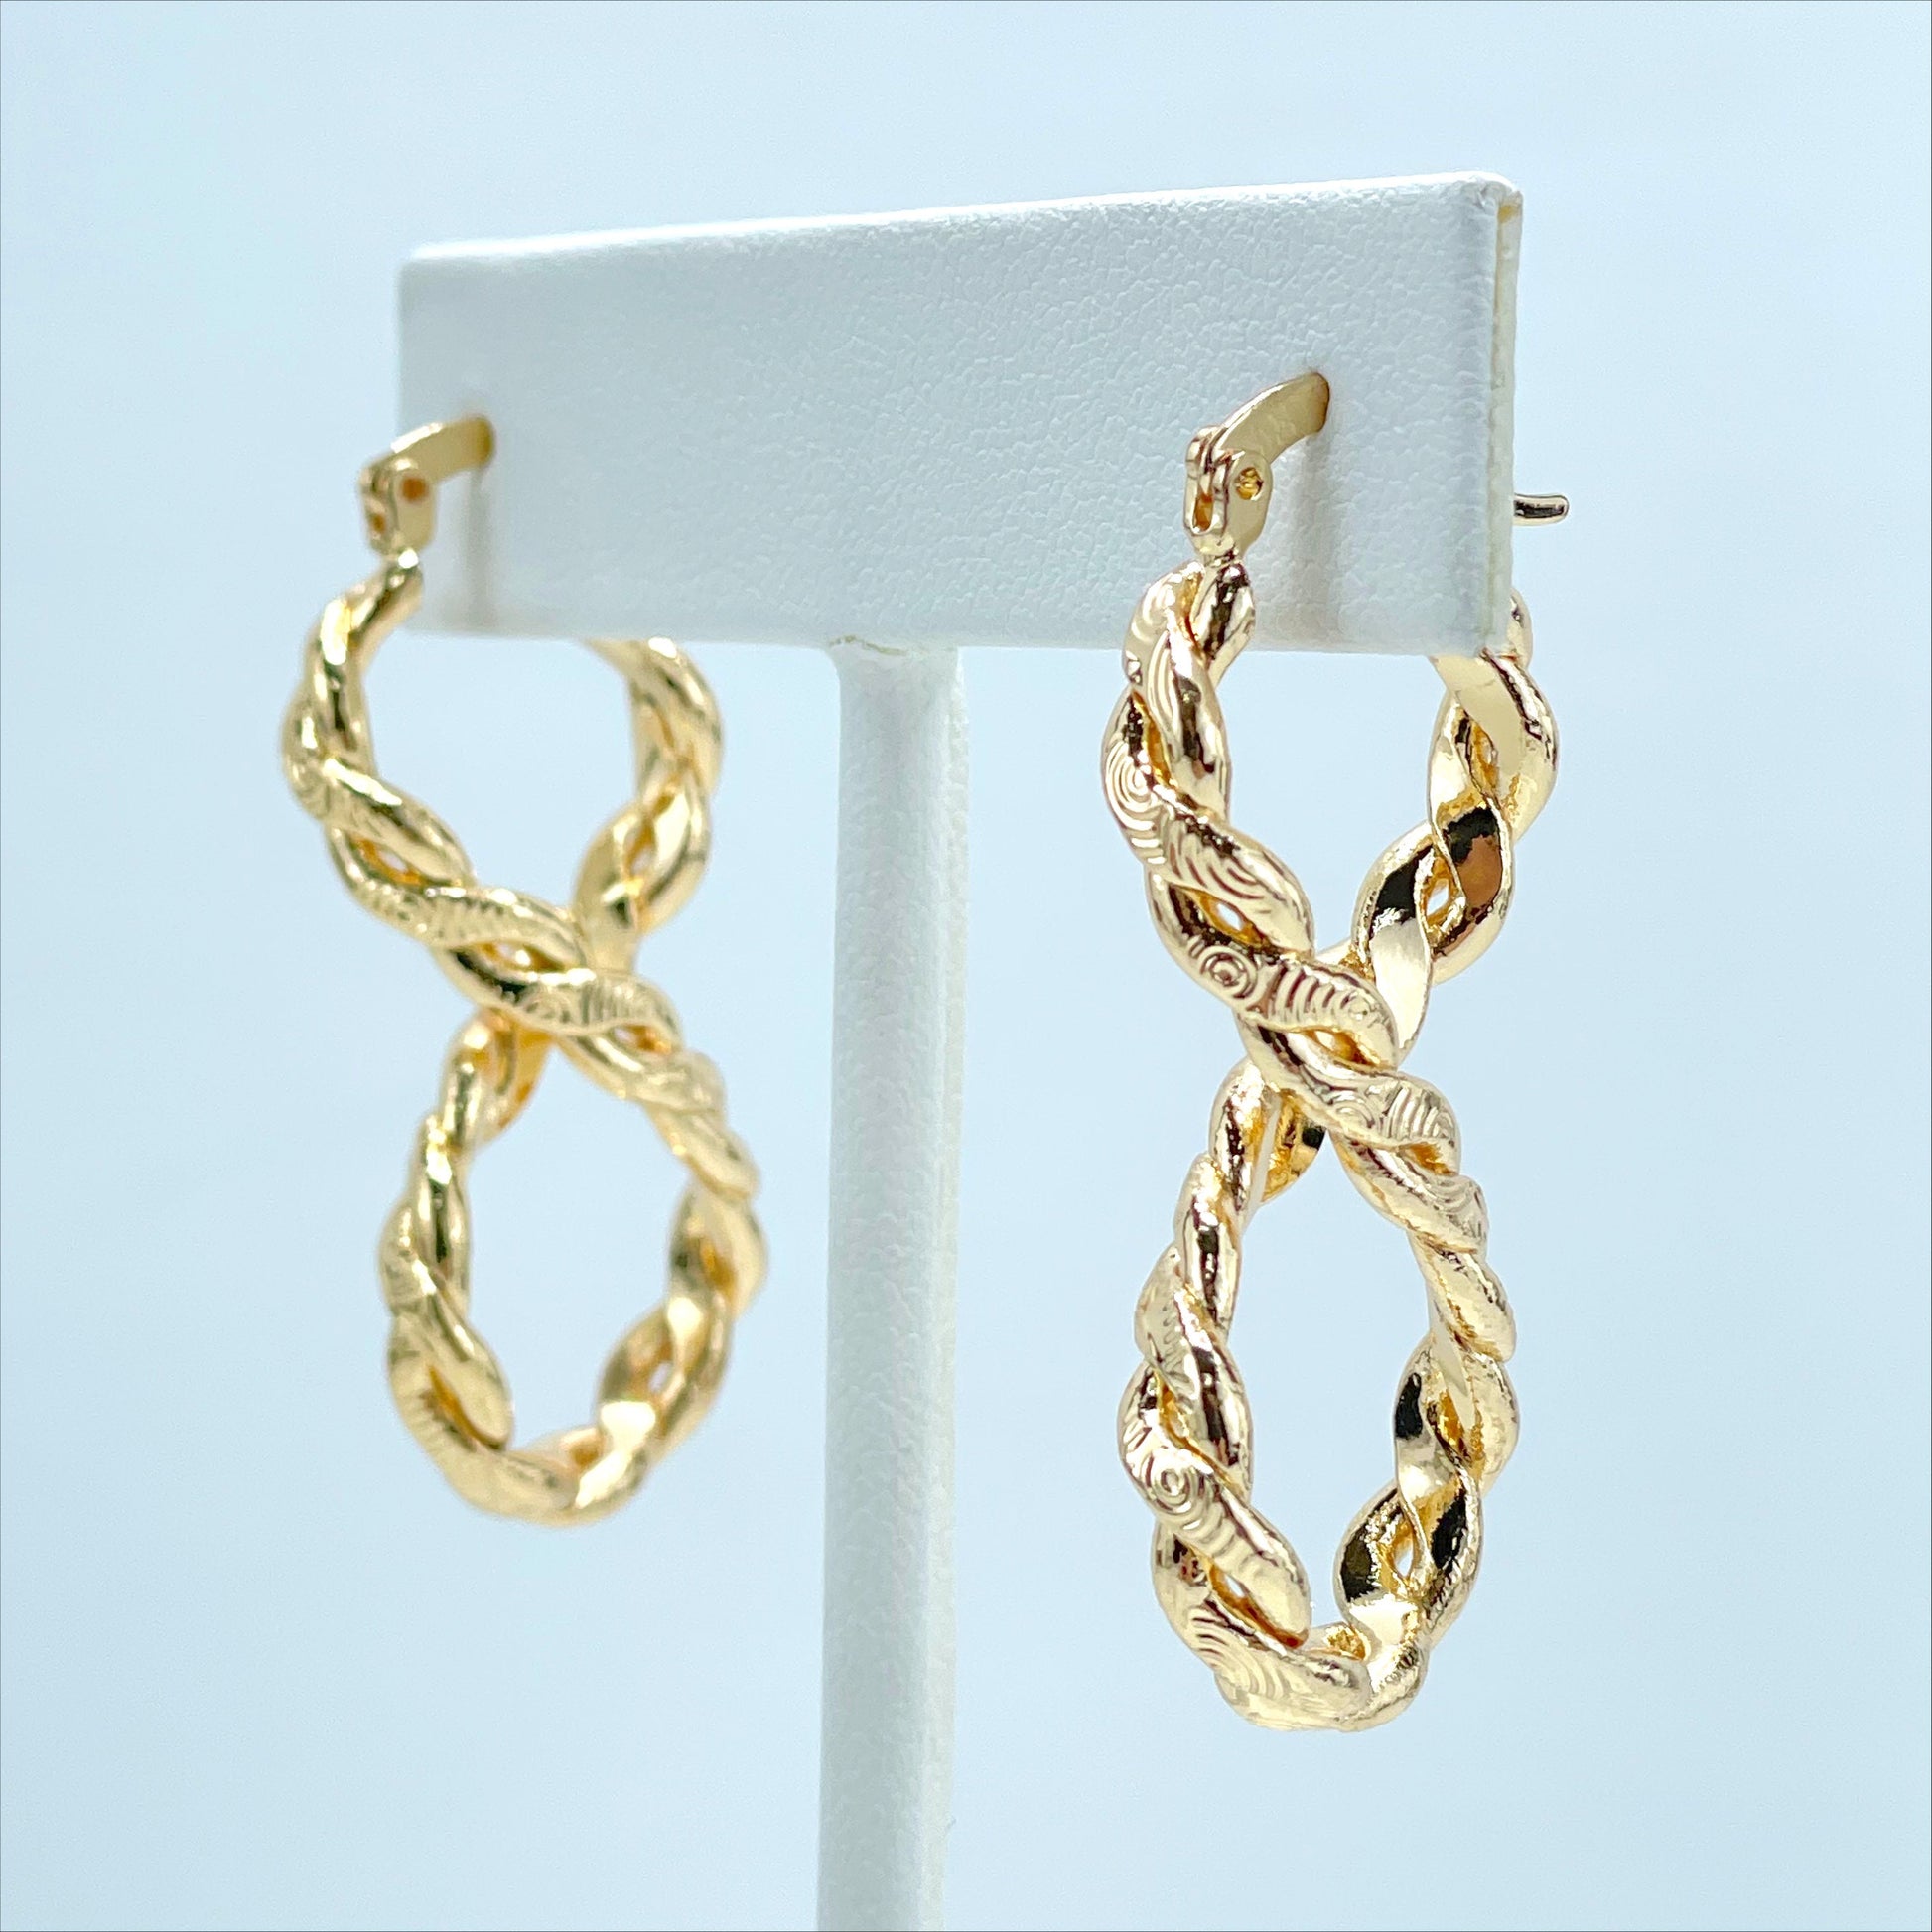 18k Gold Filled 40mm Textured Infinity Twisted Dangle Earrings, 4mm Thickness, Wholesale Jewelry Making Supplies